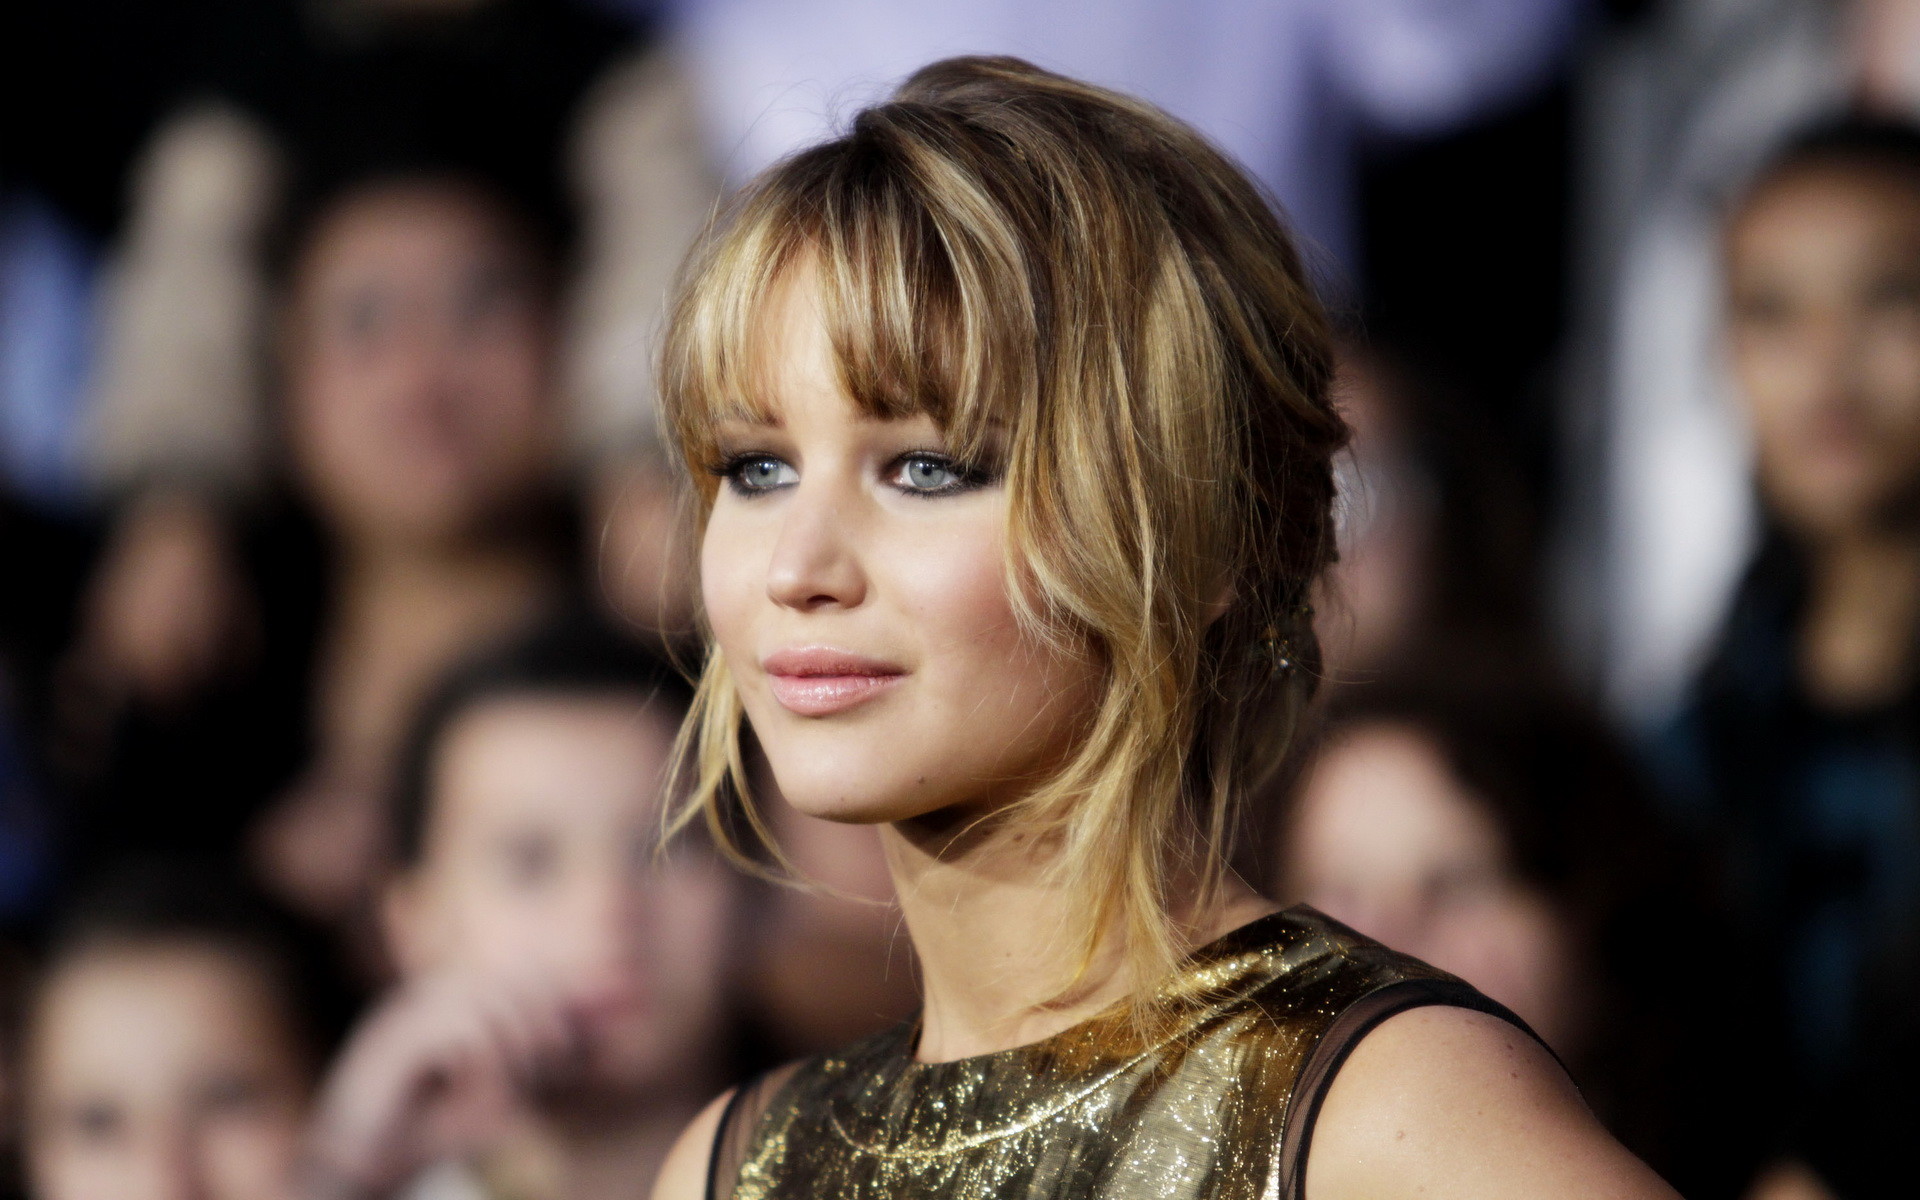 Jennifer Lawrence HD Wallpapers – Free download latest Jennifer Lawrence HD Wallpapers for Computer, Mobile, iPhone, iPad or any Gadget at Wallpape